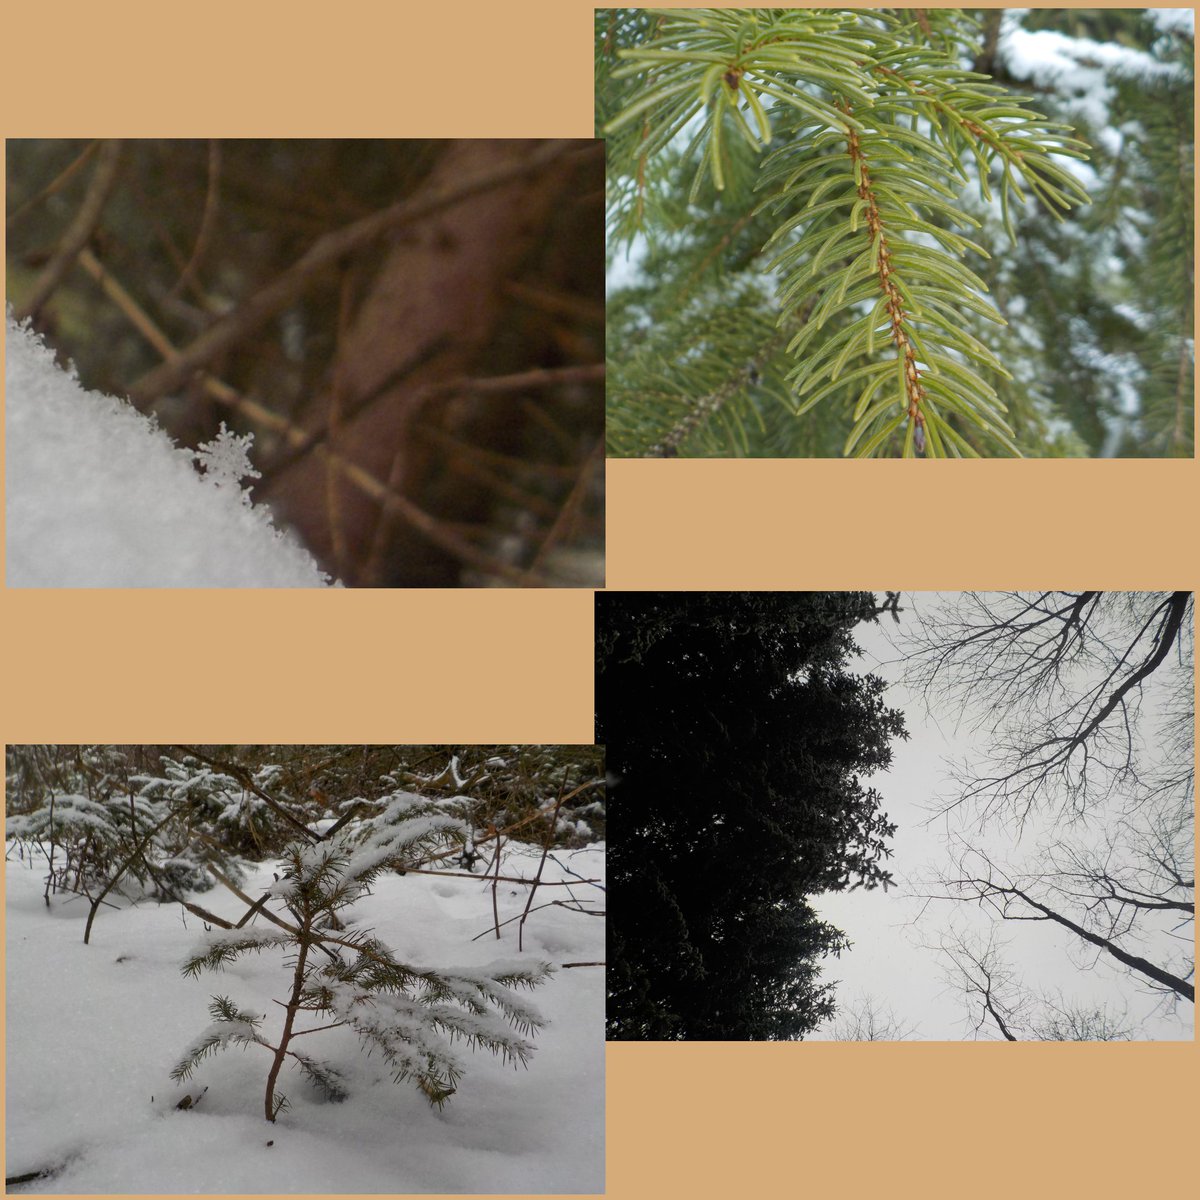 Check out some of the Nature Photography that students from @VenturaParkPS took! Despite the cold weather, we had wonderful visits with them.

#NaturePhotography #YRDSB @YRDSB @YRDSBGetOut